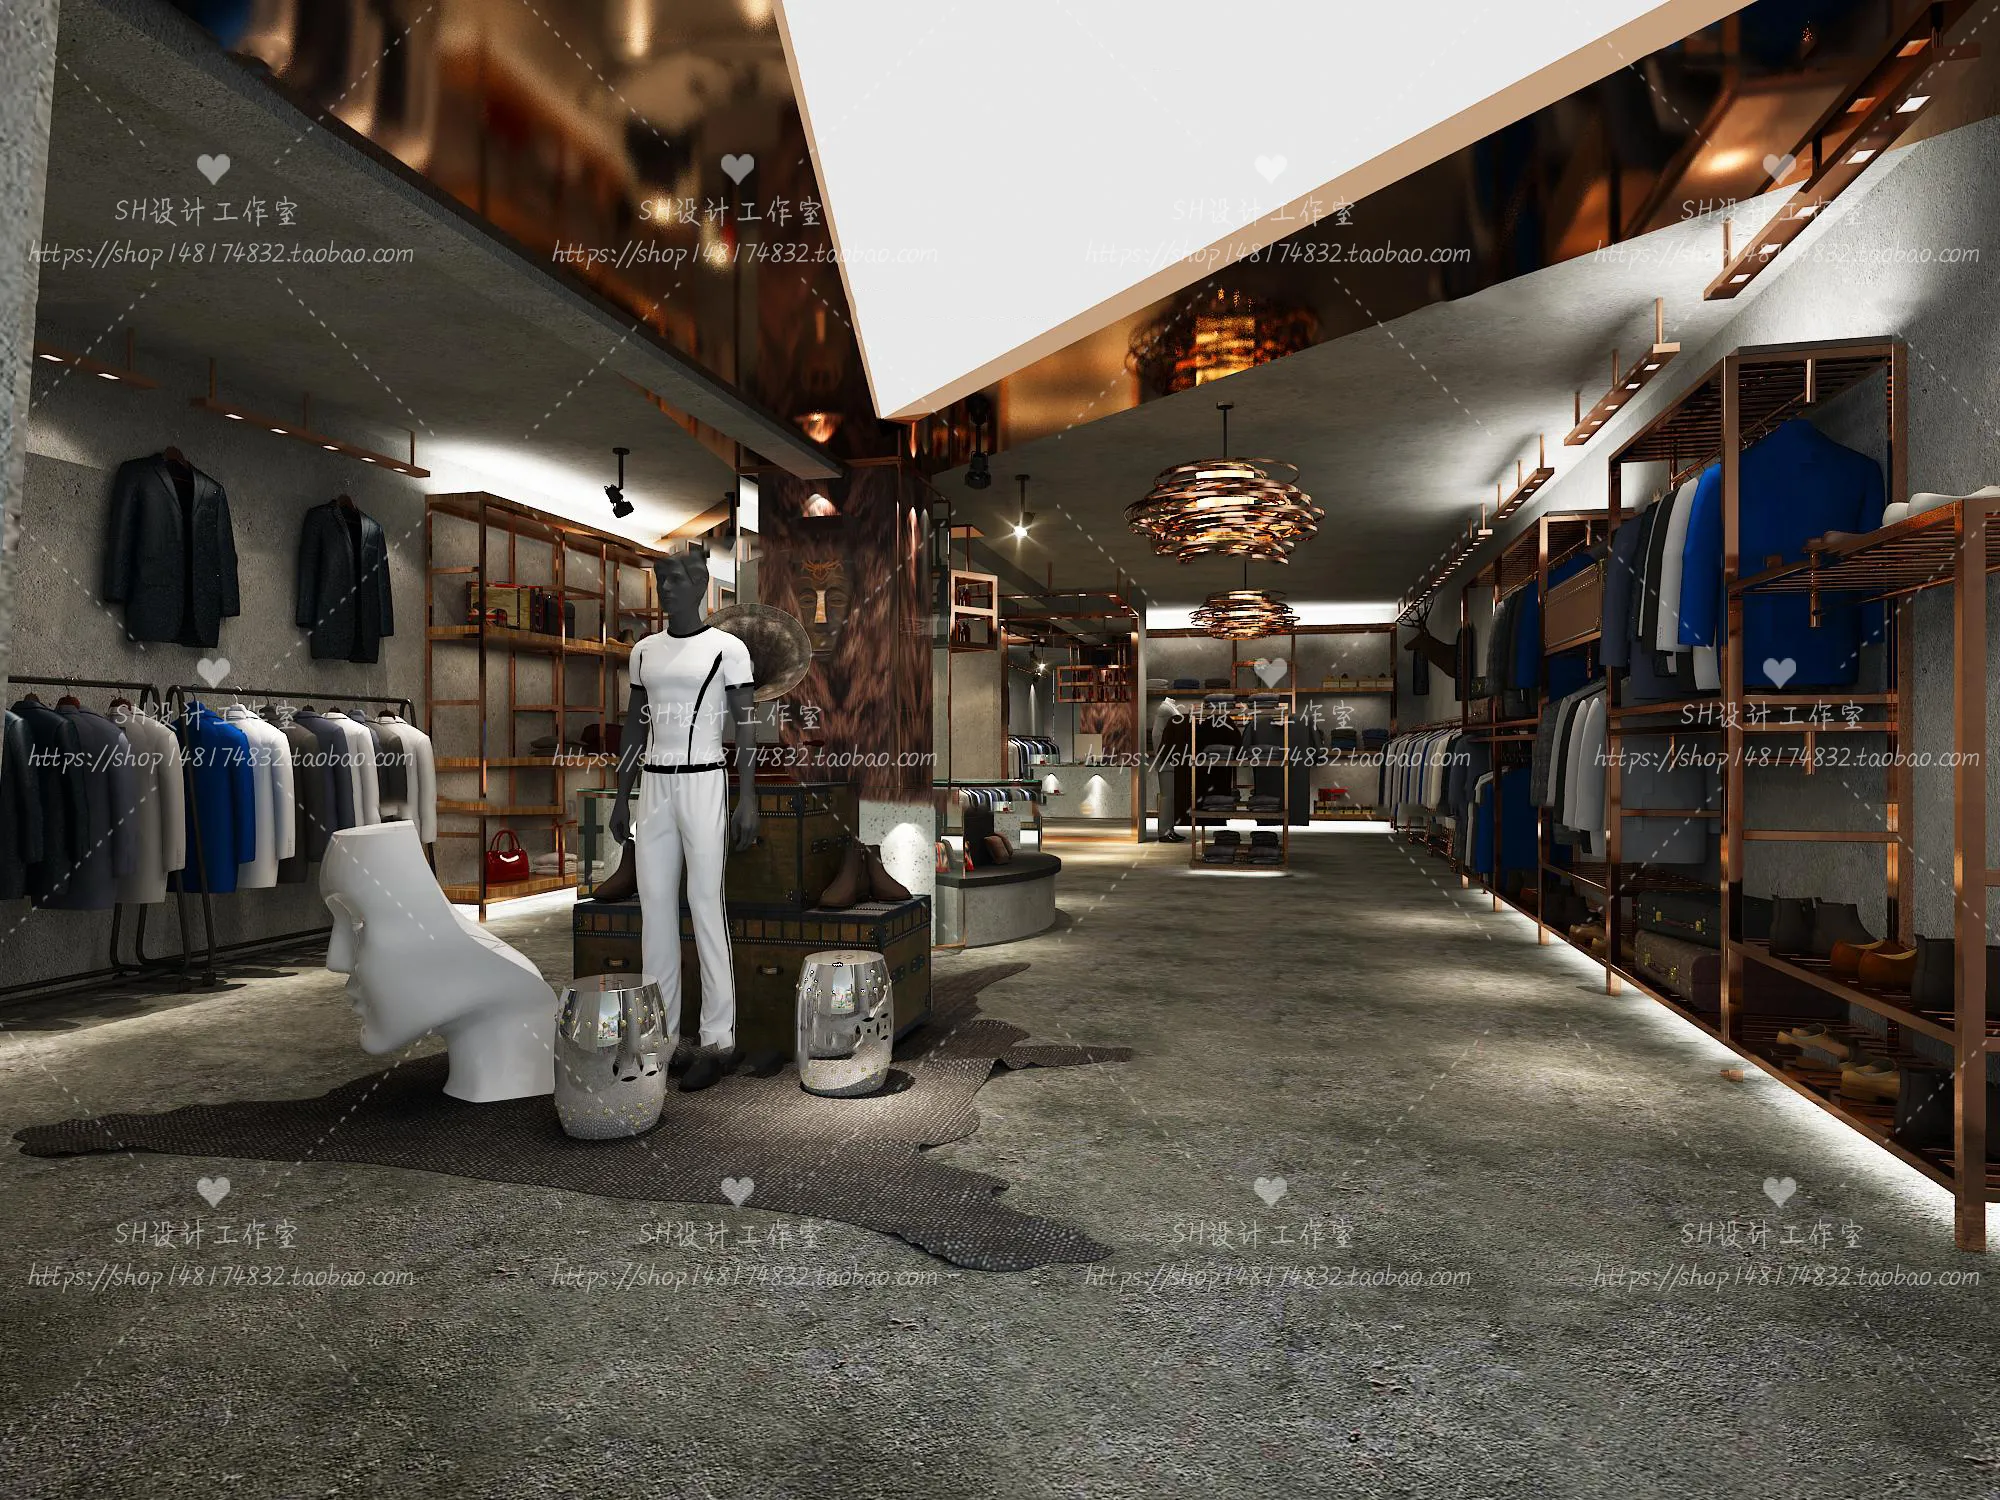 CLOTHING STORE 3D SCENES – VRAY RENDER – 71